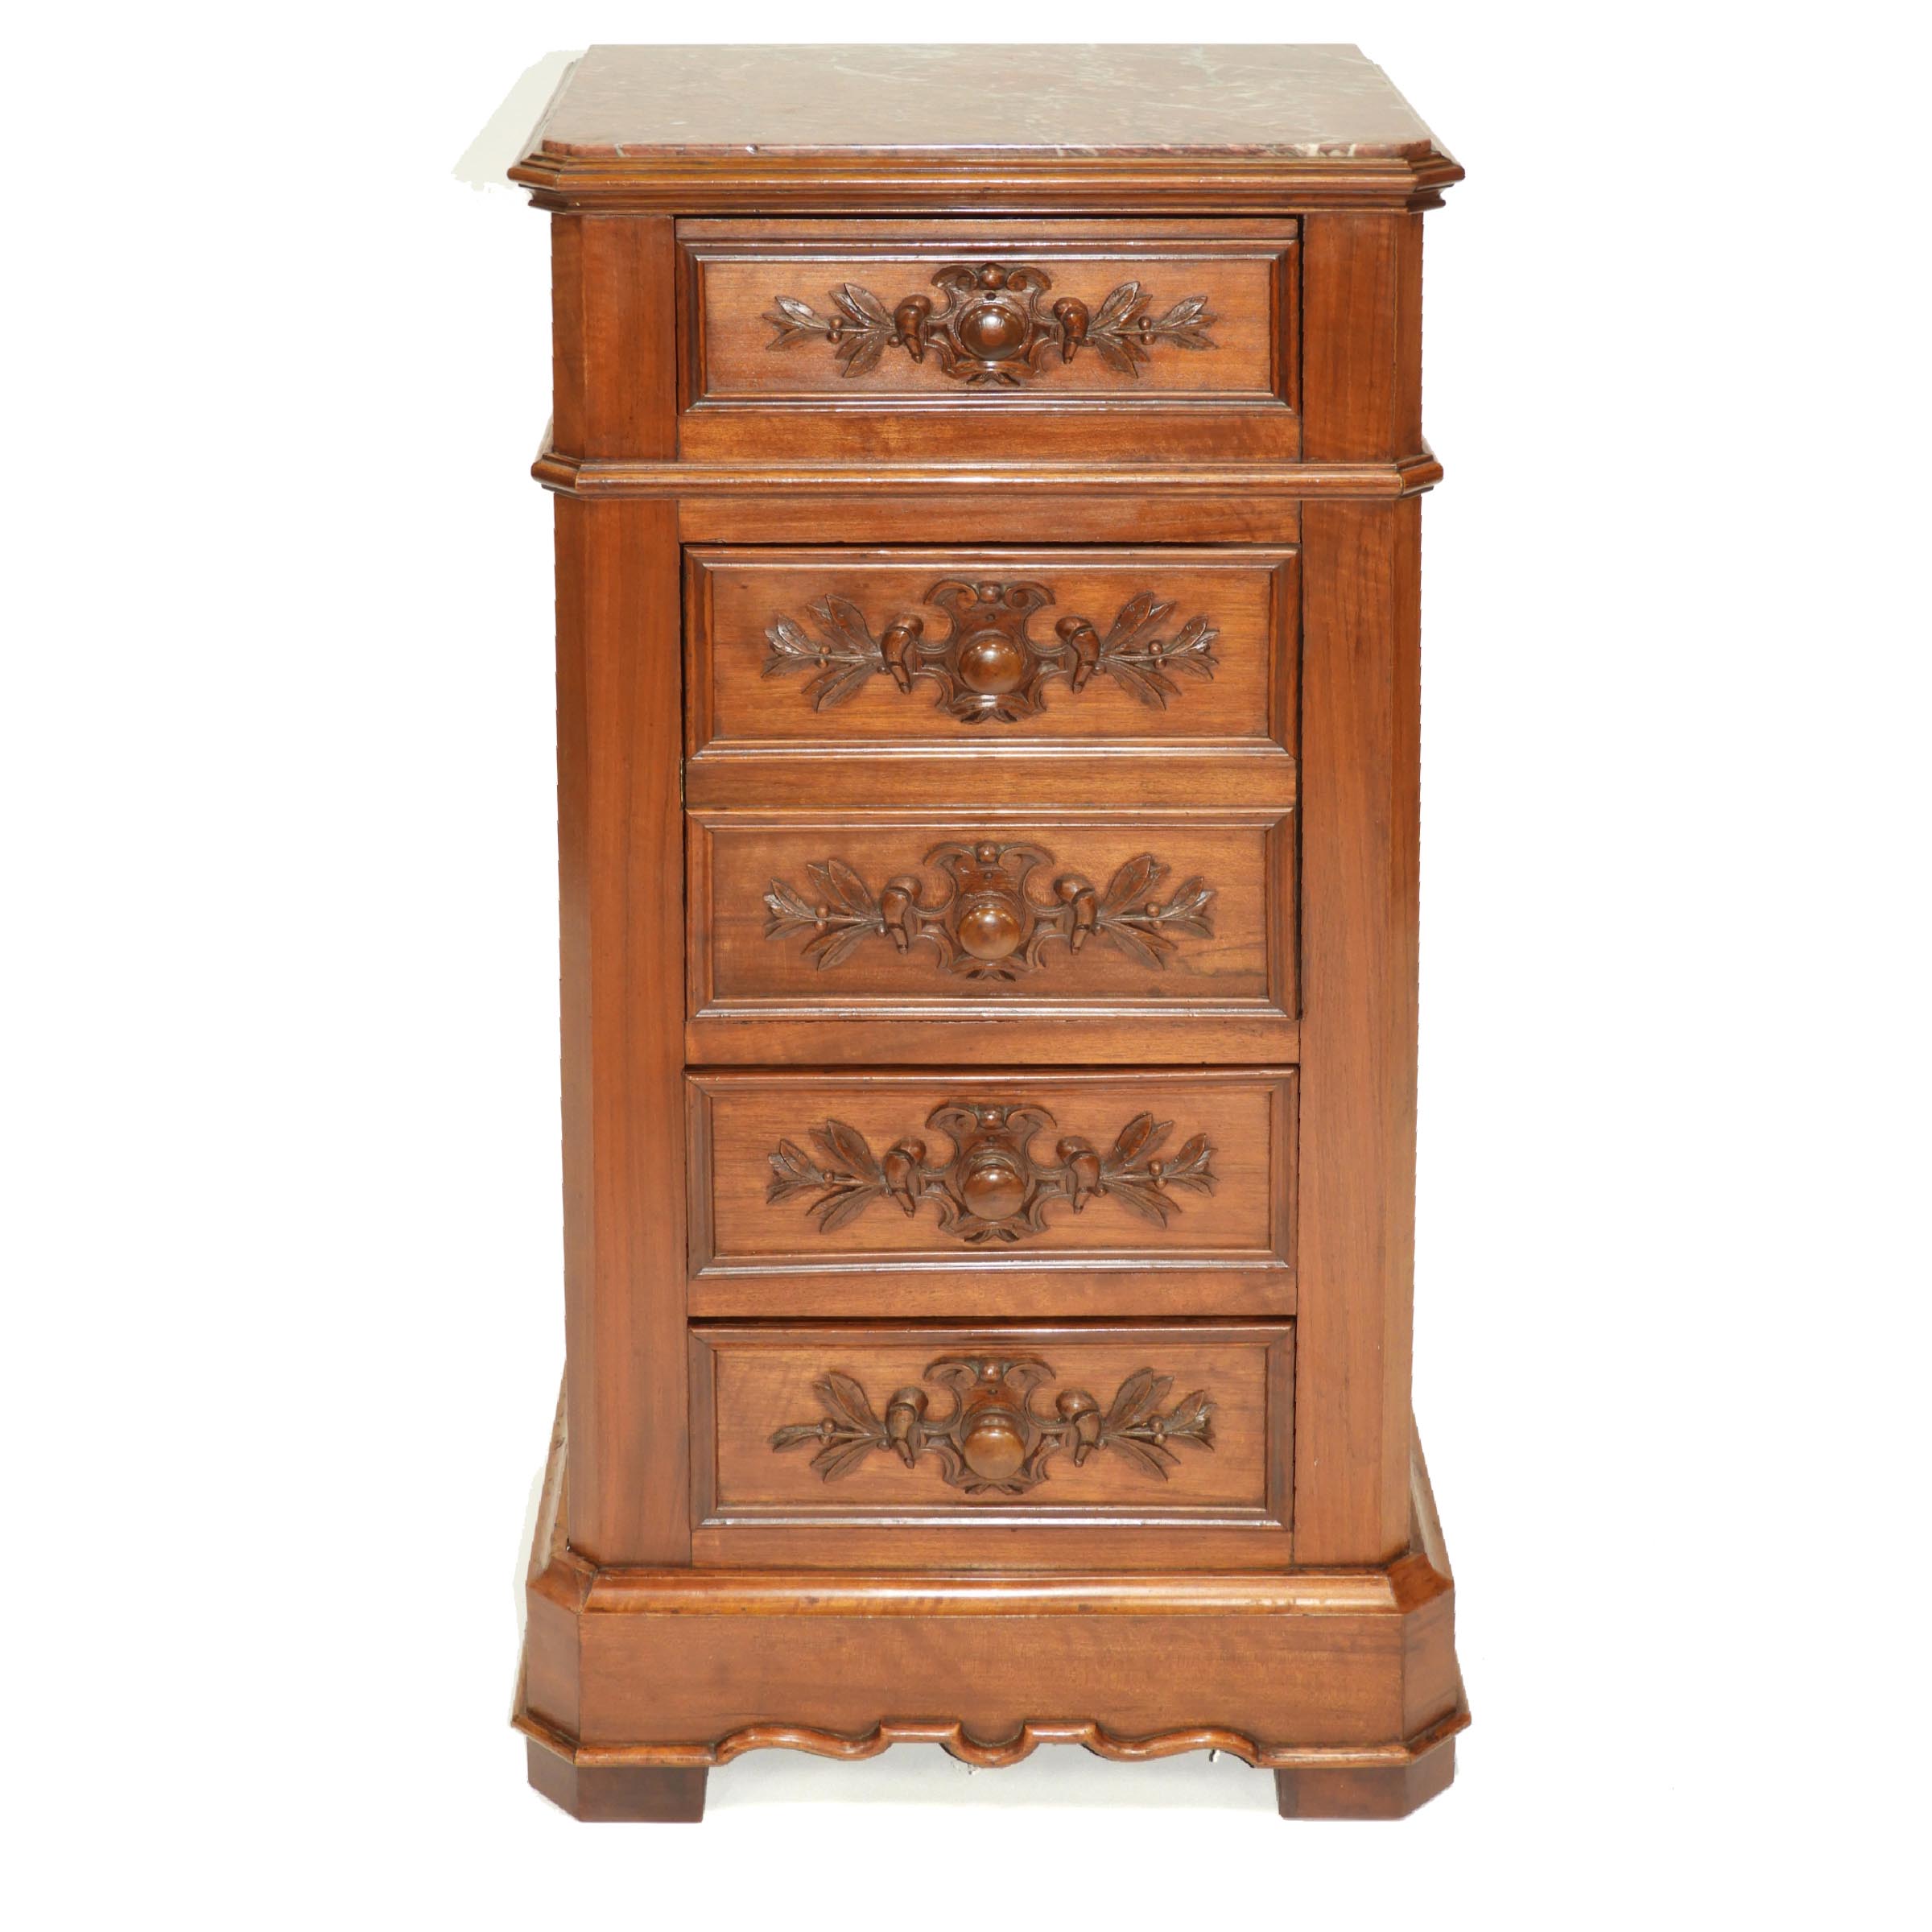 French Carved Walnut Commode, late 19th century